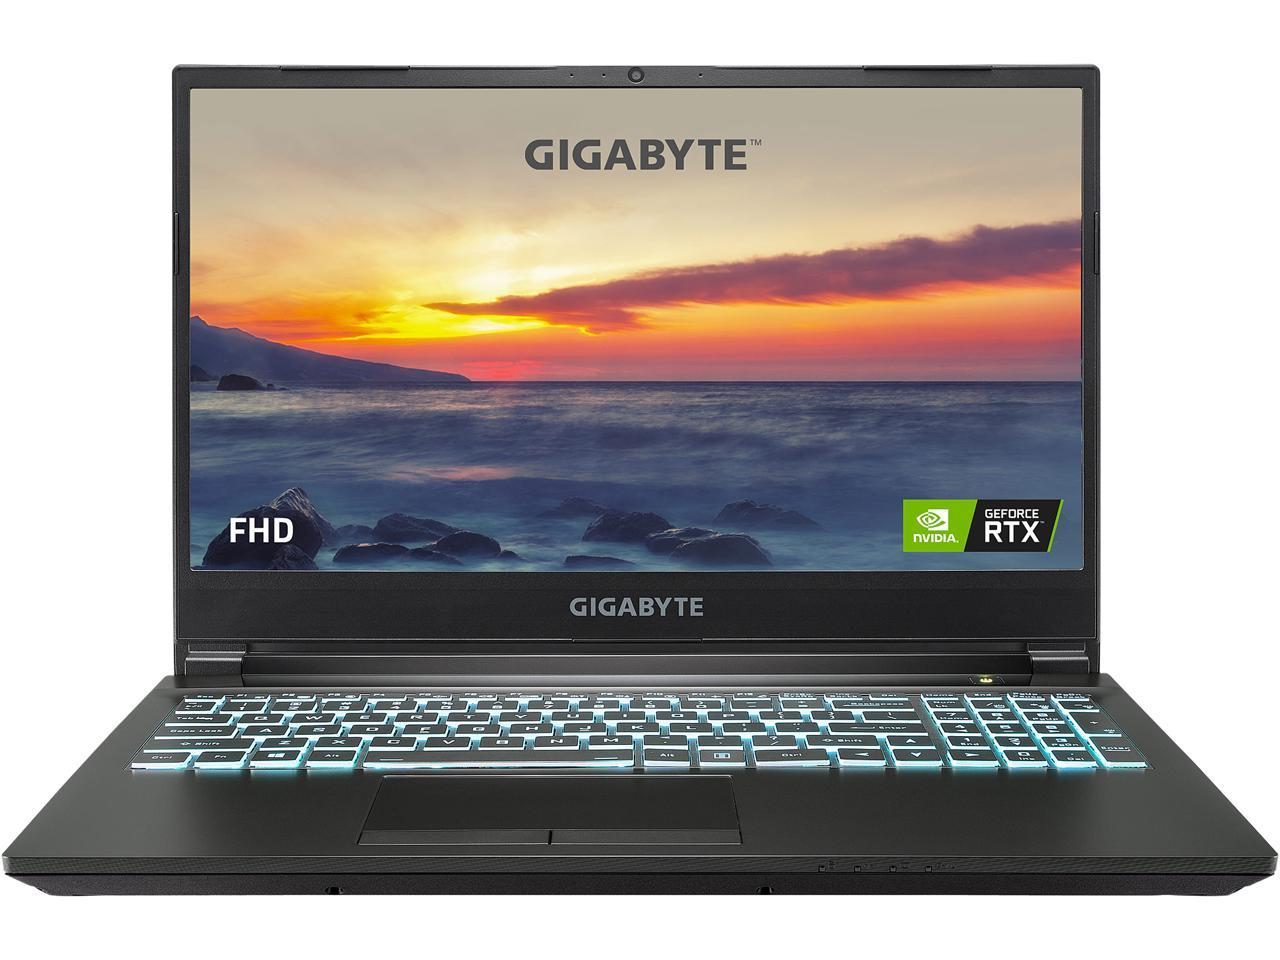 GIGABYTE G5 Gaming Notebook [i5-11400H, 16GB RAM DDR4 3200, 512GB SSD, GeForce RTX 3050 Ti, 15.6" IPS 144hz] for $849 w/ FS after MIR